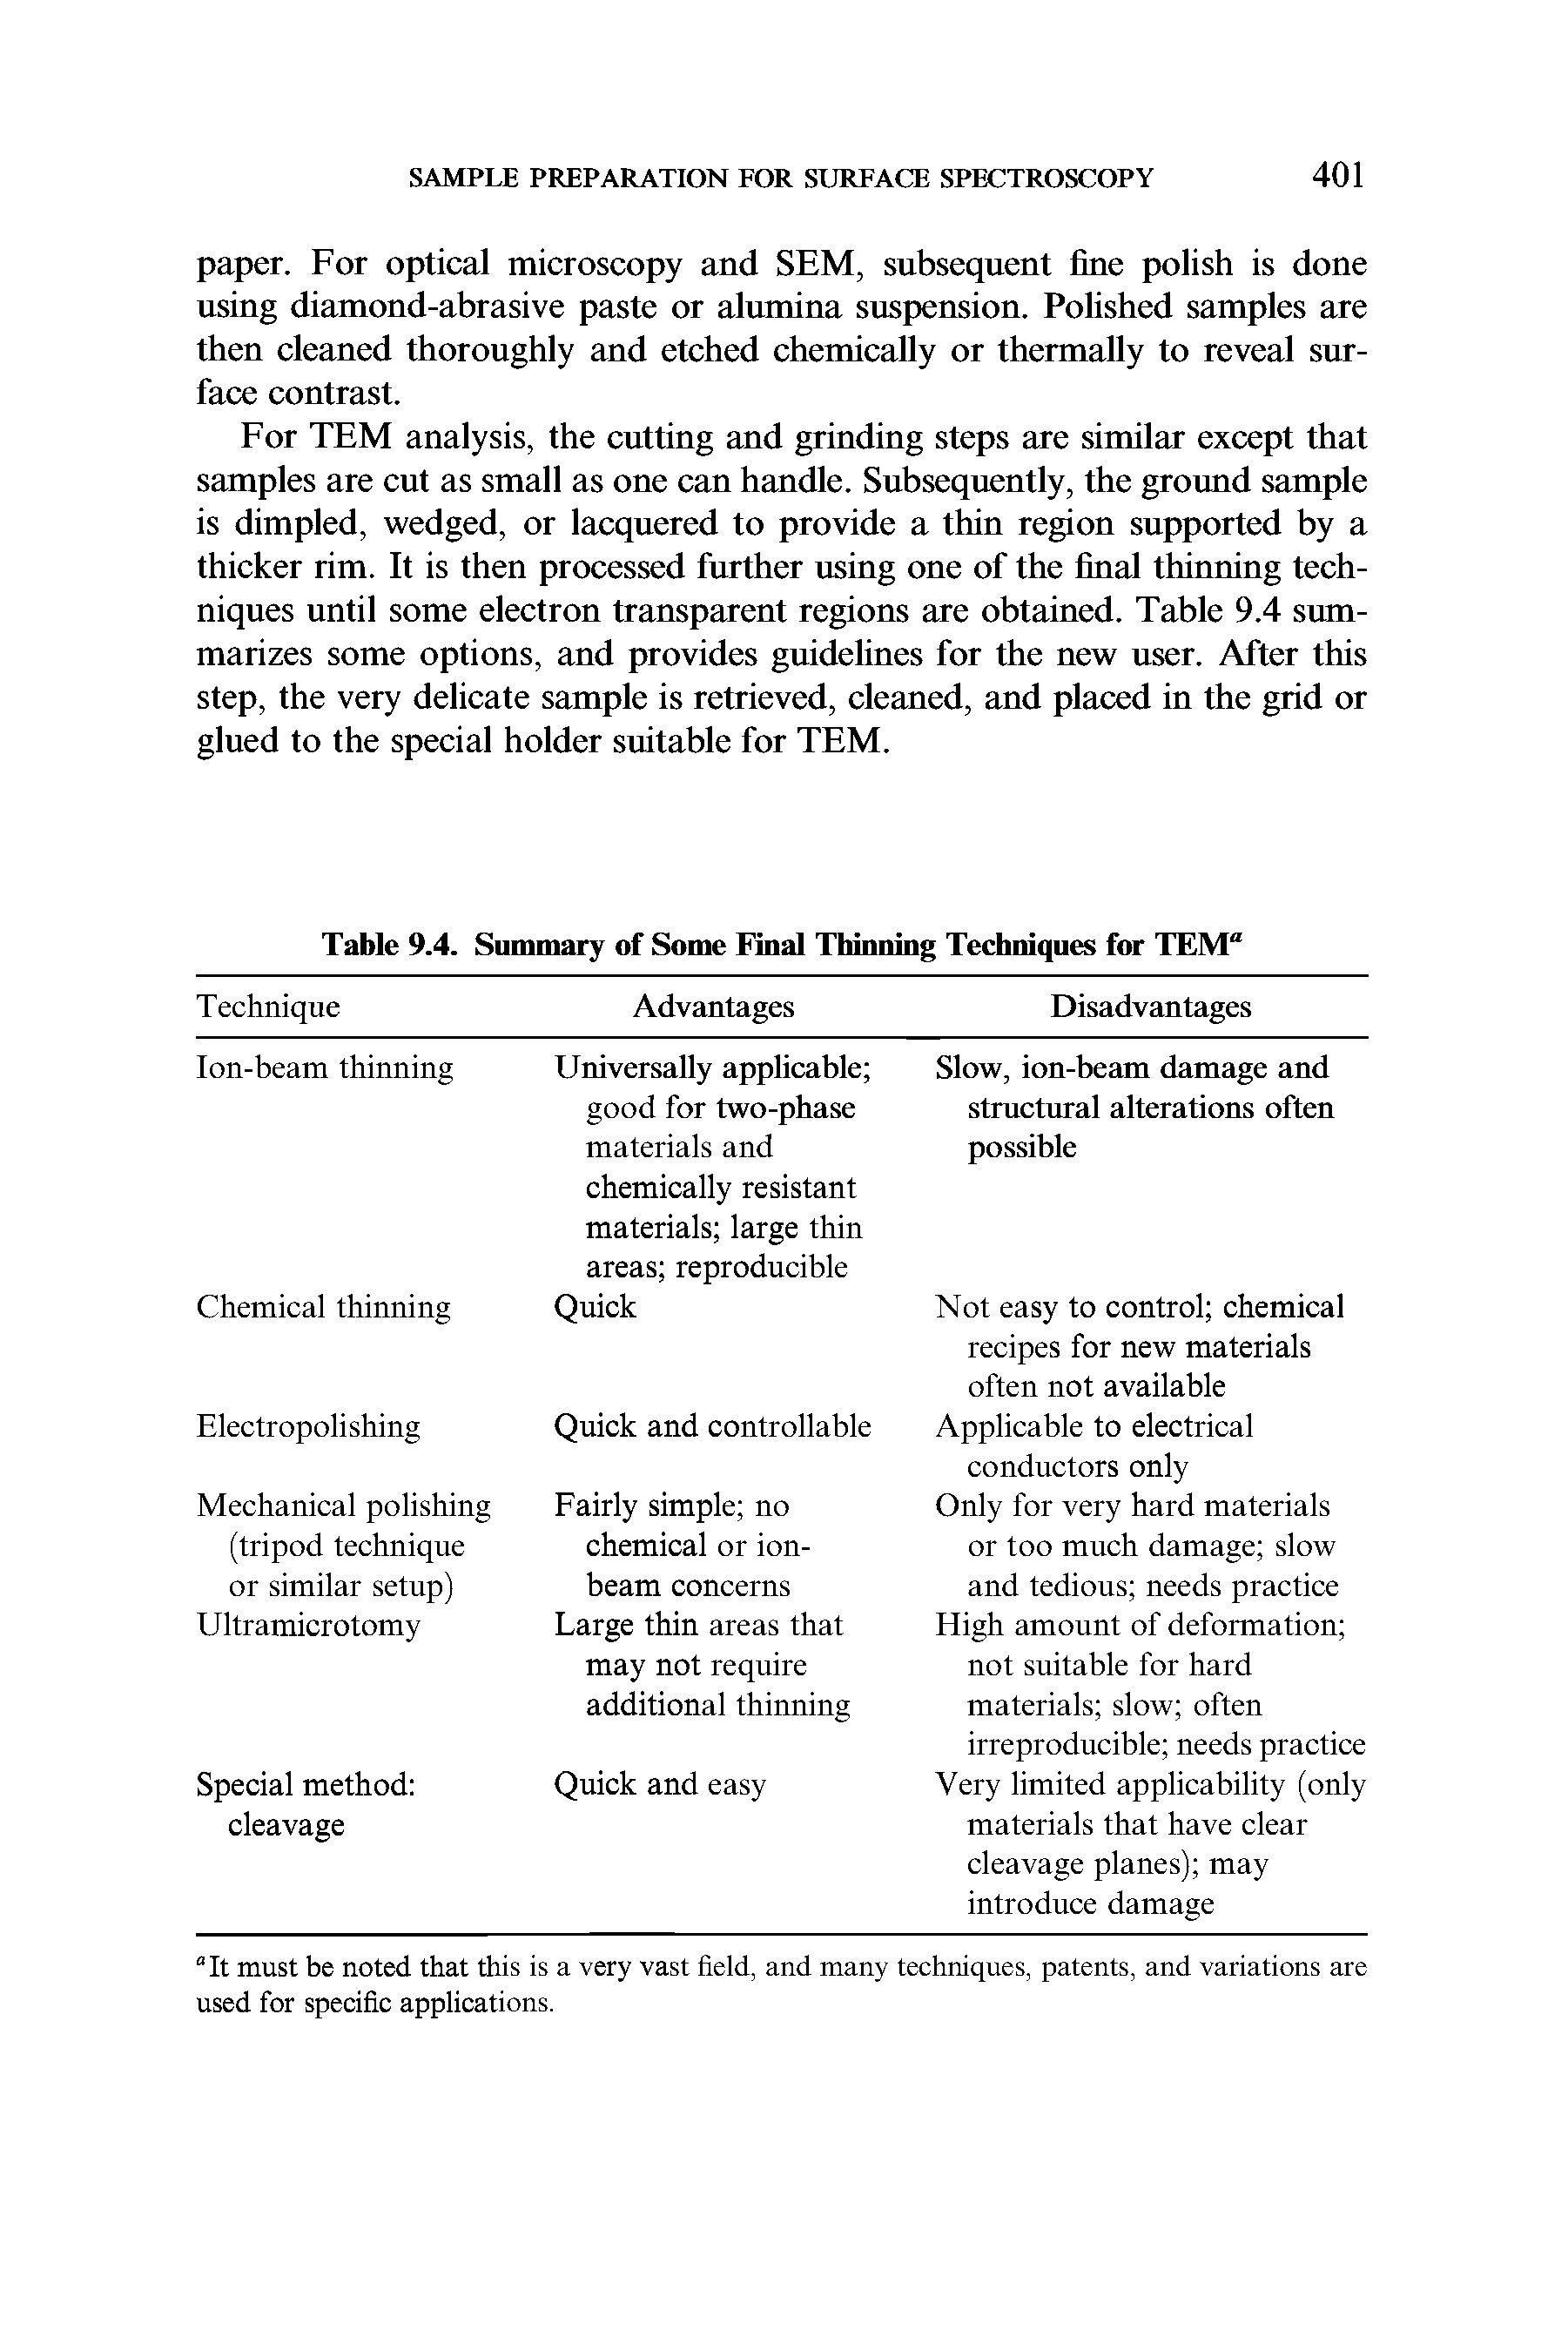 Table 9.4. Summary of Some Final Thinning Techniques for TEM ...